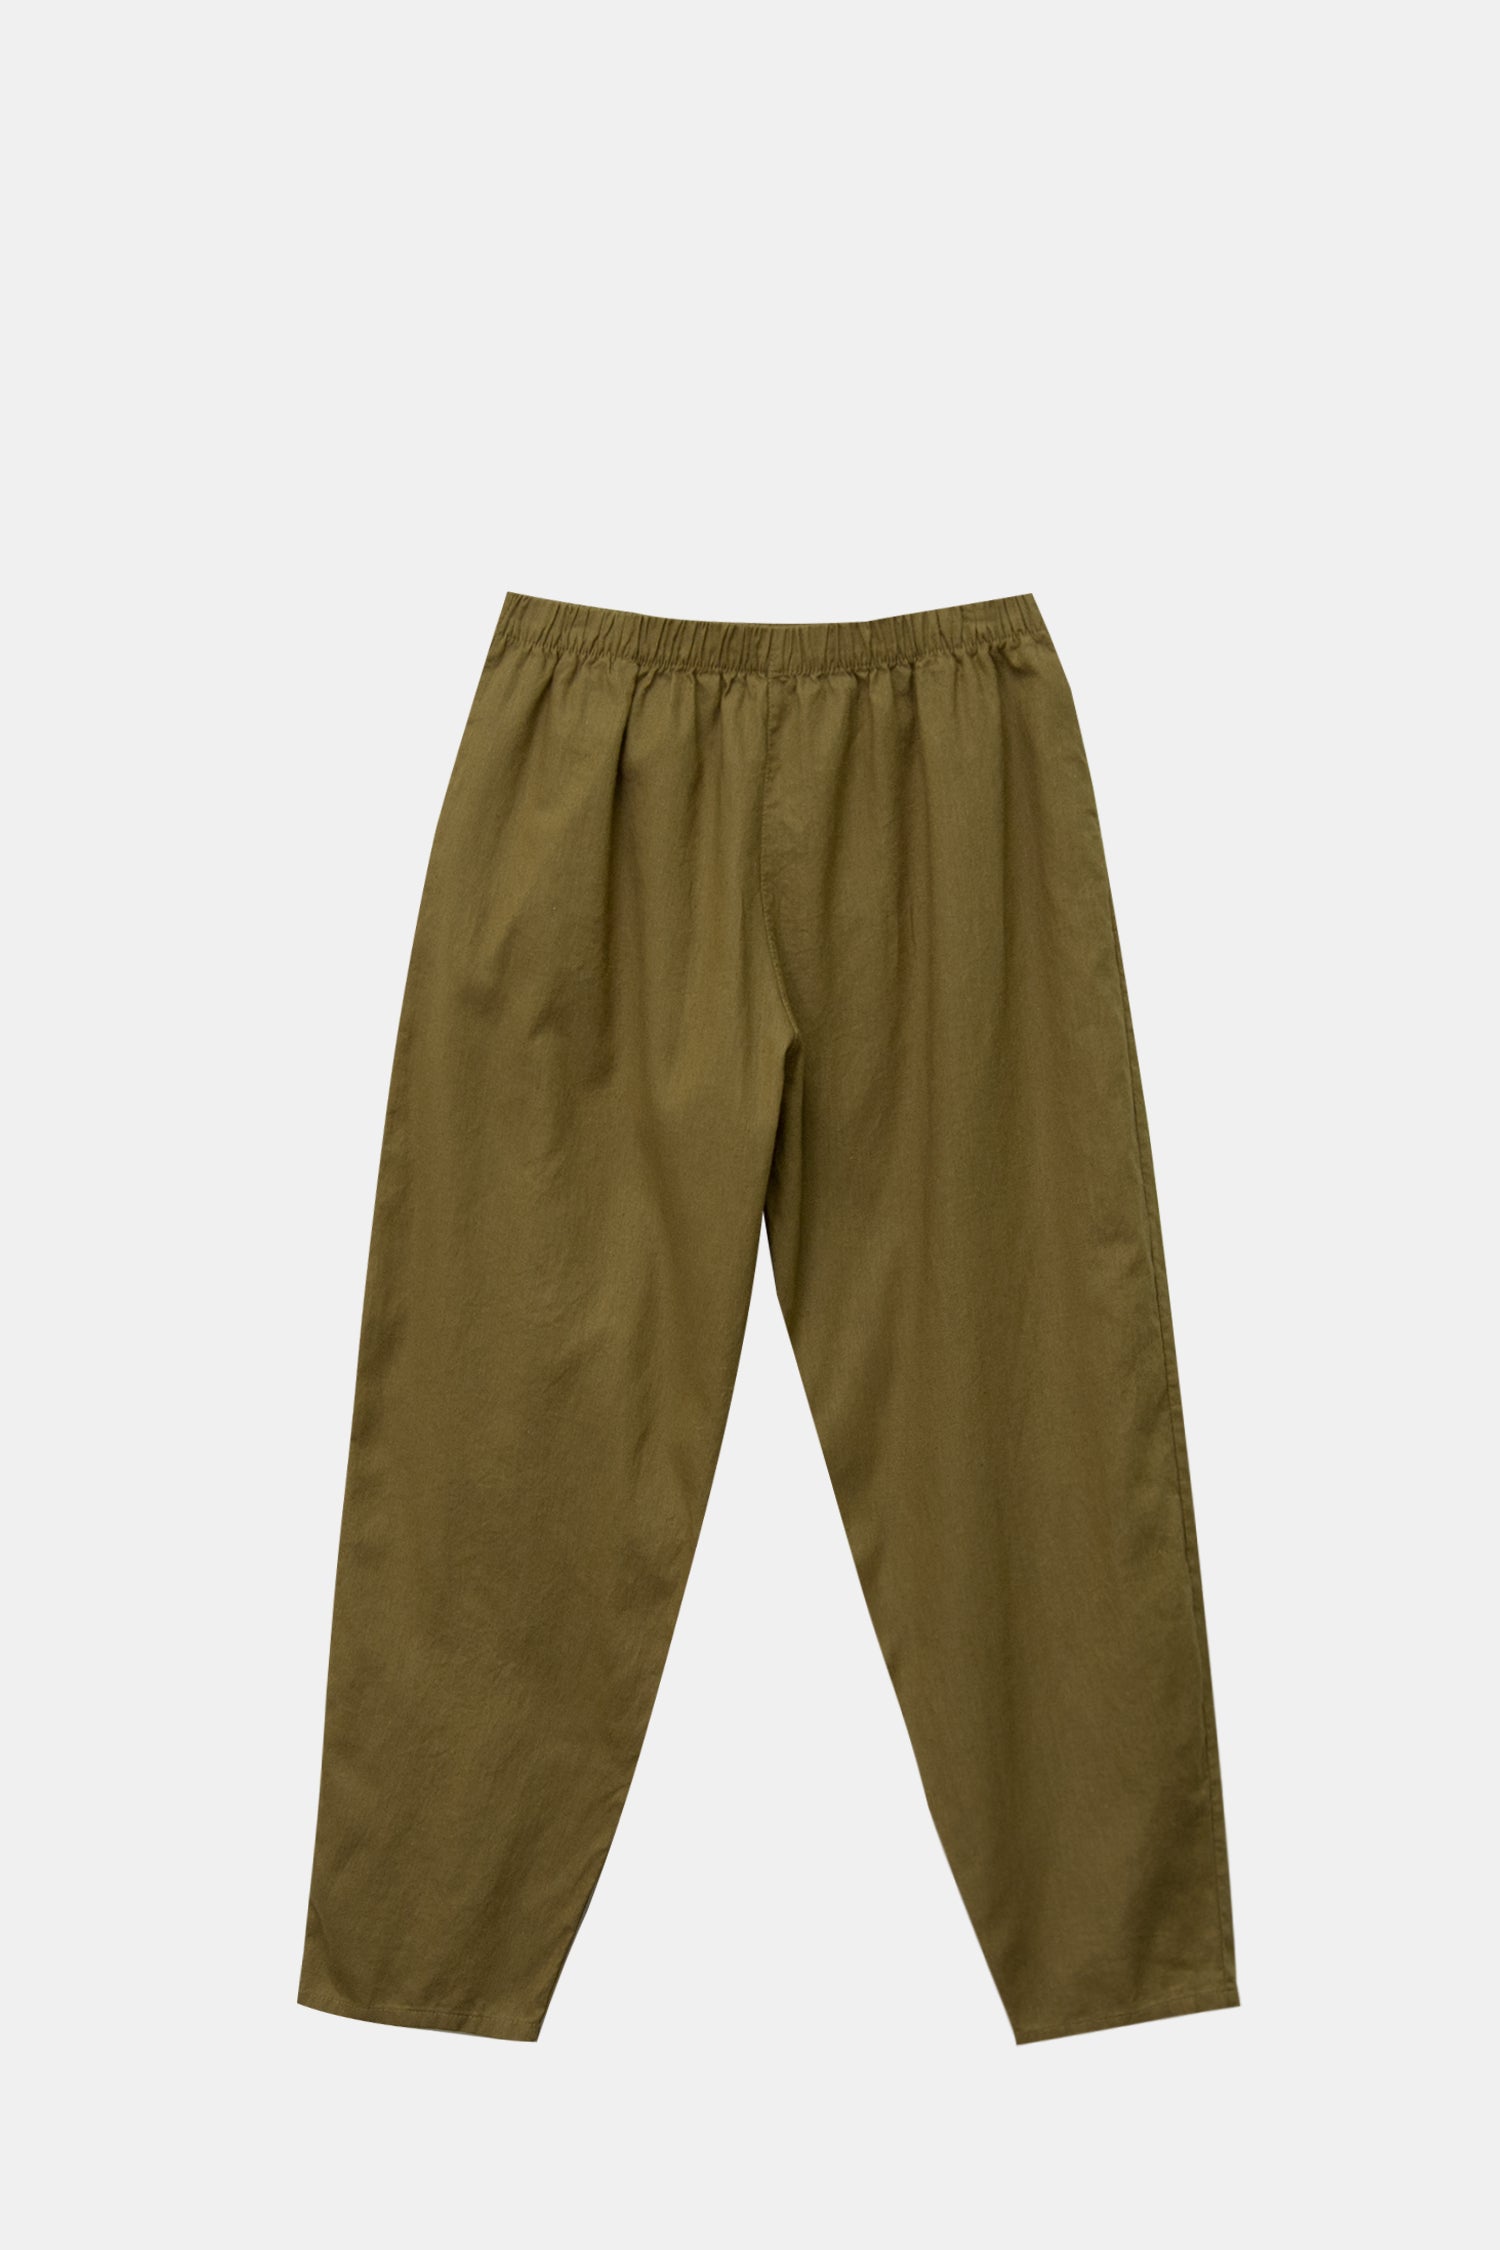 Women's Relaxed Pant